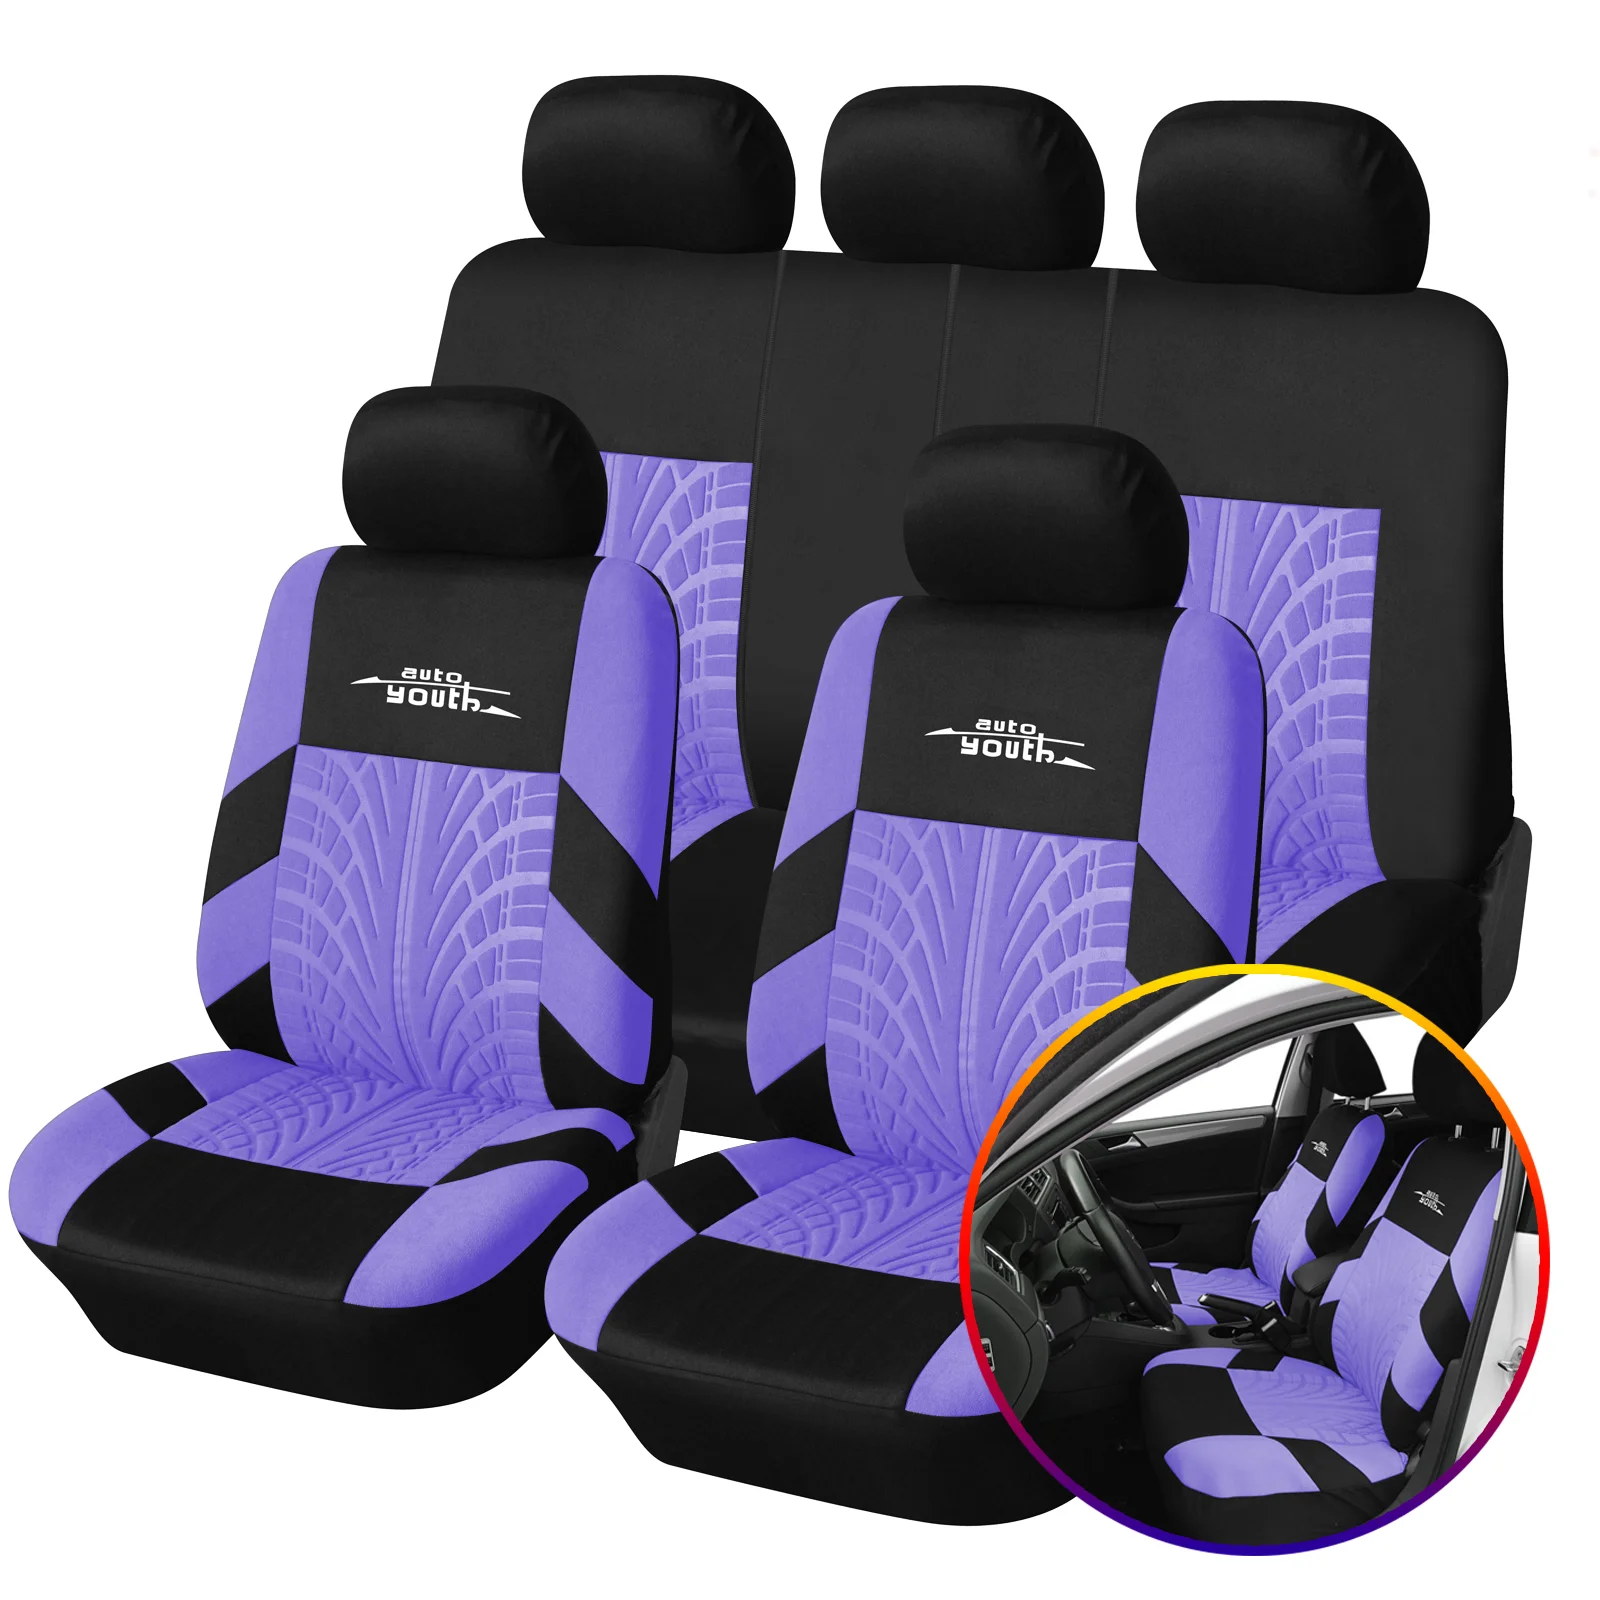 https://ae01.alicdn.com/kf/S8a429e78b671498e8bec7a8b4f57bbb8p/Universal-Car-Seat-Cover-Polyester-Fabric-Protect-Seat-Covers-Fashionable-Decoration-of-Noble-Seat-Cover-Tire.png